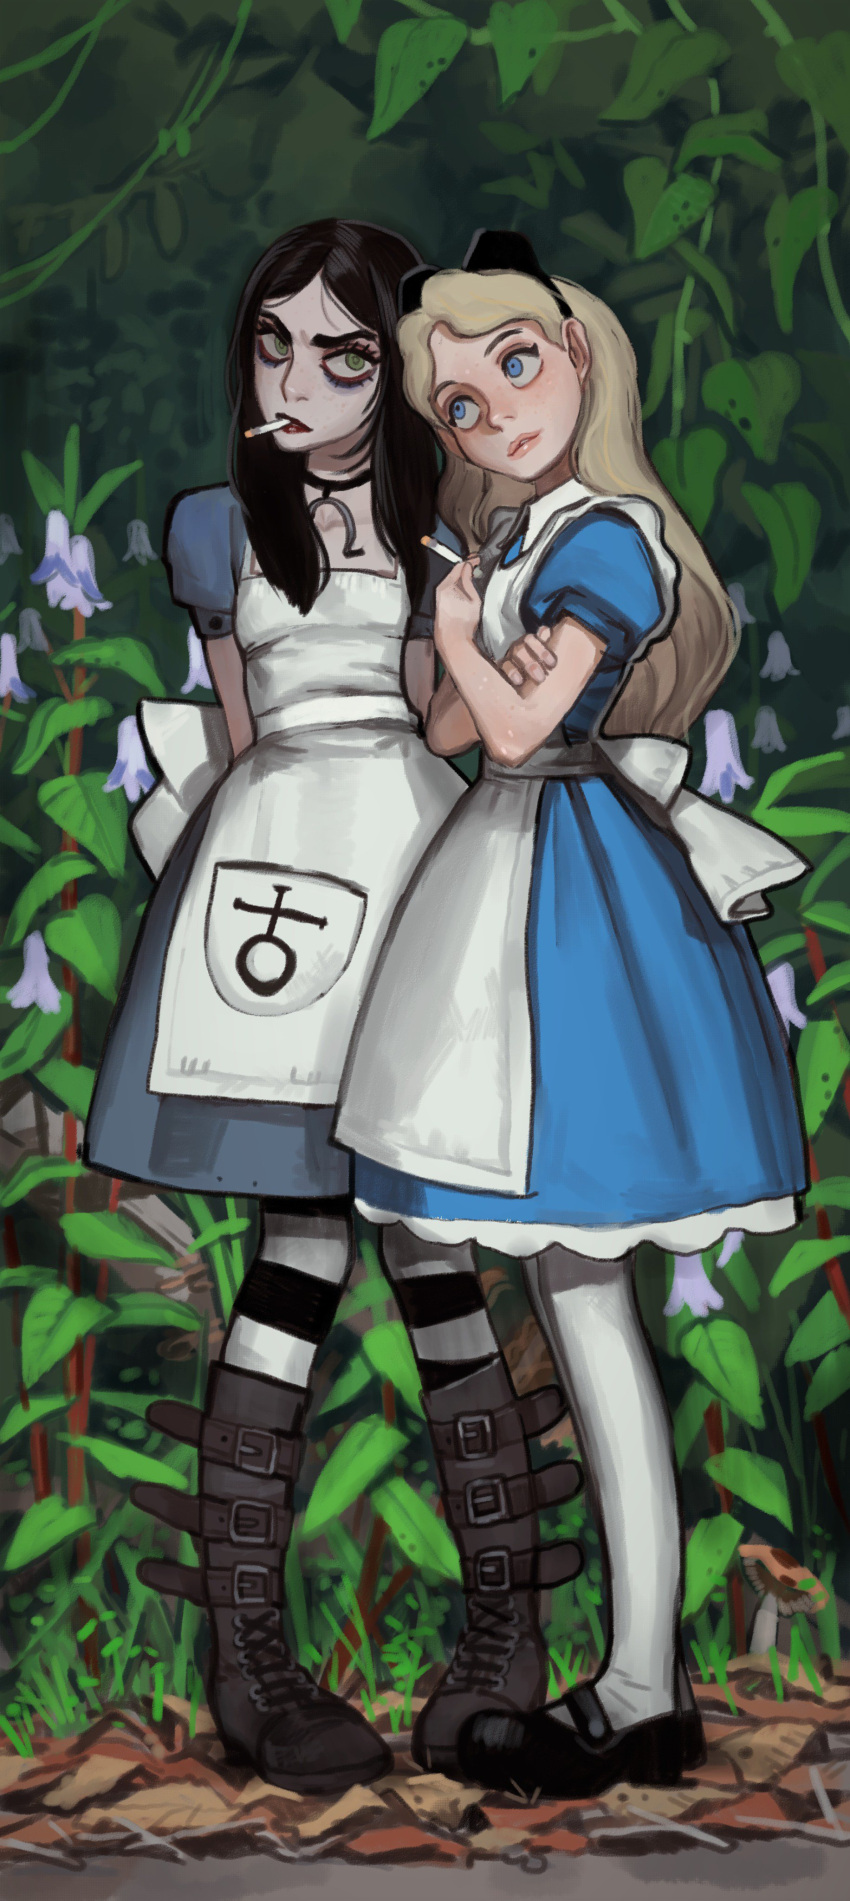 2girls absurdres alice_(alice_in_wonderland) alice_in_wonderland american_mcgee's_alice apron belt_boots black_choker black_footwear black_hair blonde_hair blue_dress blue_eyes boots choker cigarette closed_mouth dark_persona dress dual_persona flower forest frown green_eyes grey_footwear highres holding holding_cigarette horseshoe lipstick looking_at_viewer makeup mary_janes mascara mossacannibalis multiple_girls nature outdoors pale_skin pantyhose pigeon-toed puffy_short_sleeves puffy_sleeves red_lips ringed_eyes shoes short_sleeves smoking striped striped_legwear white_apron white_legwear